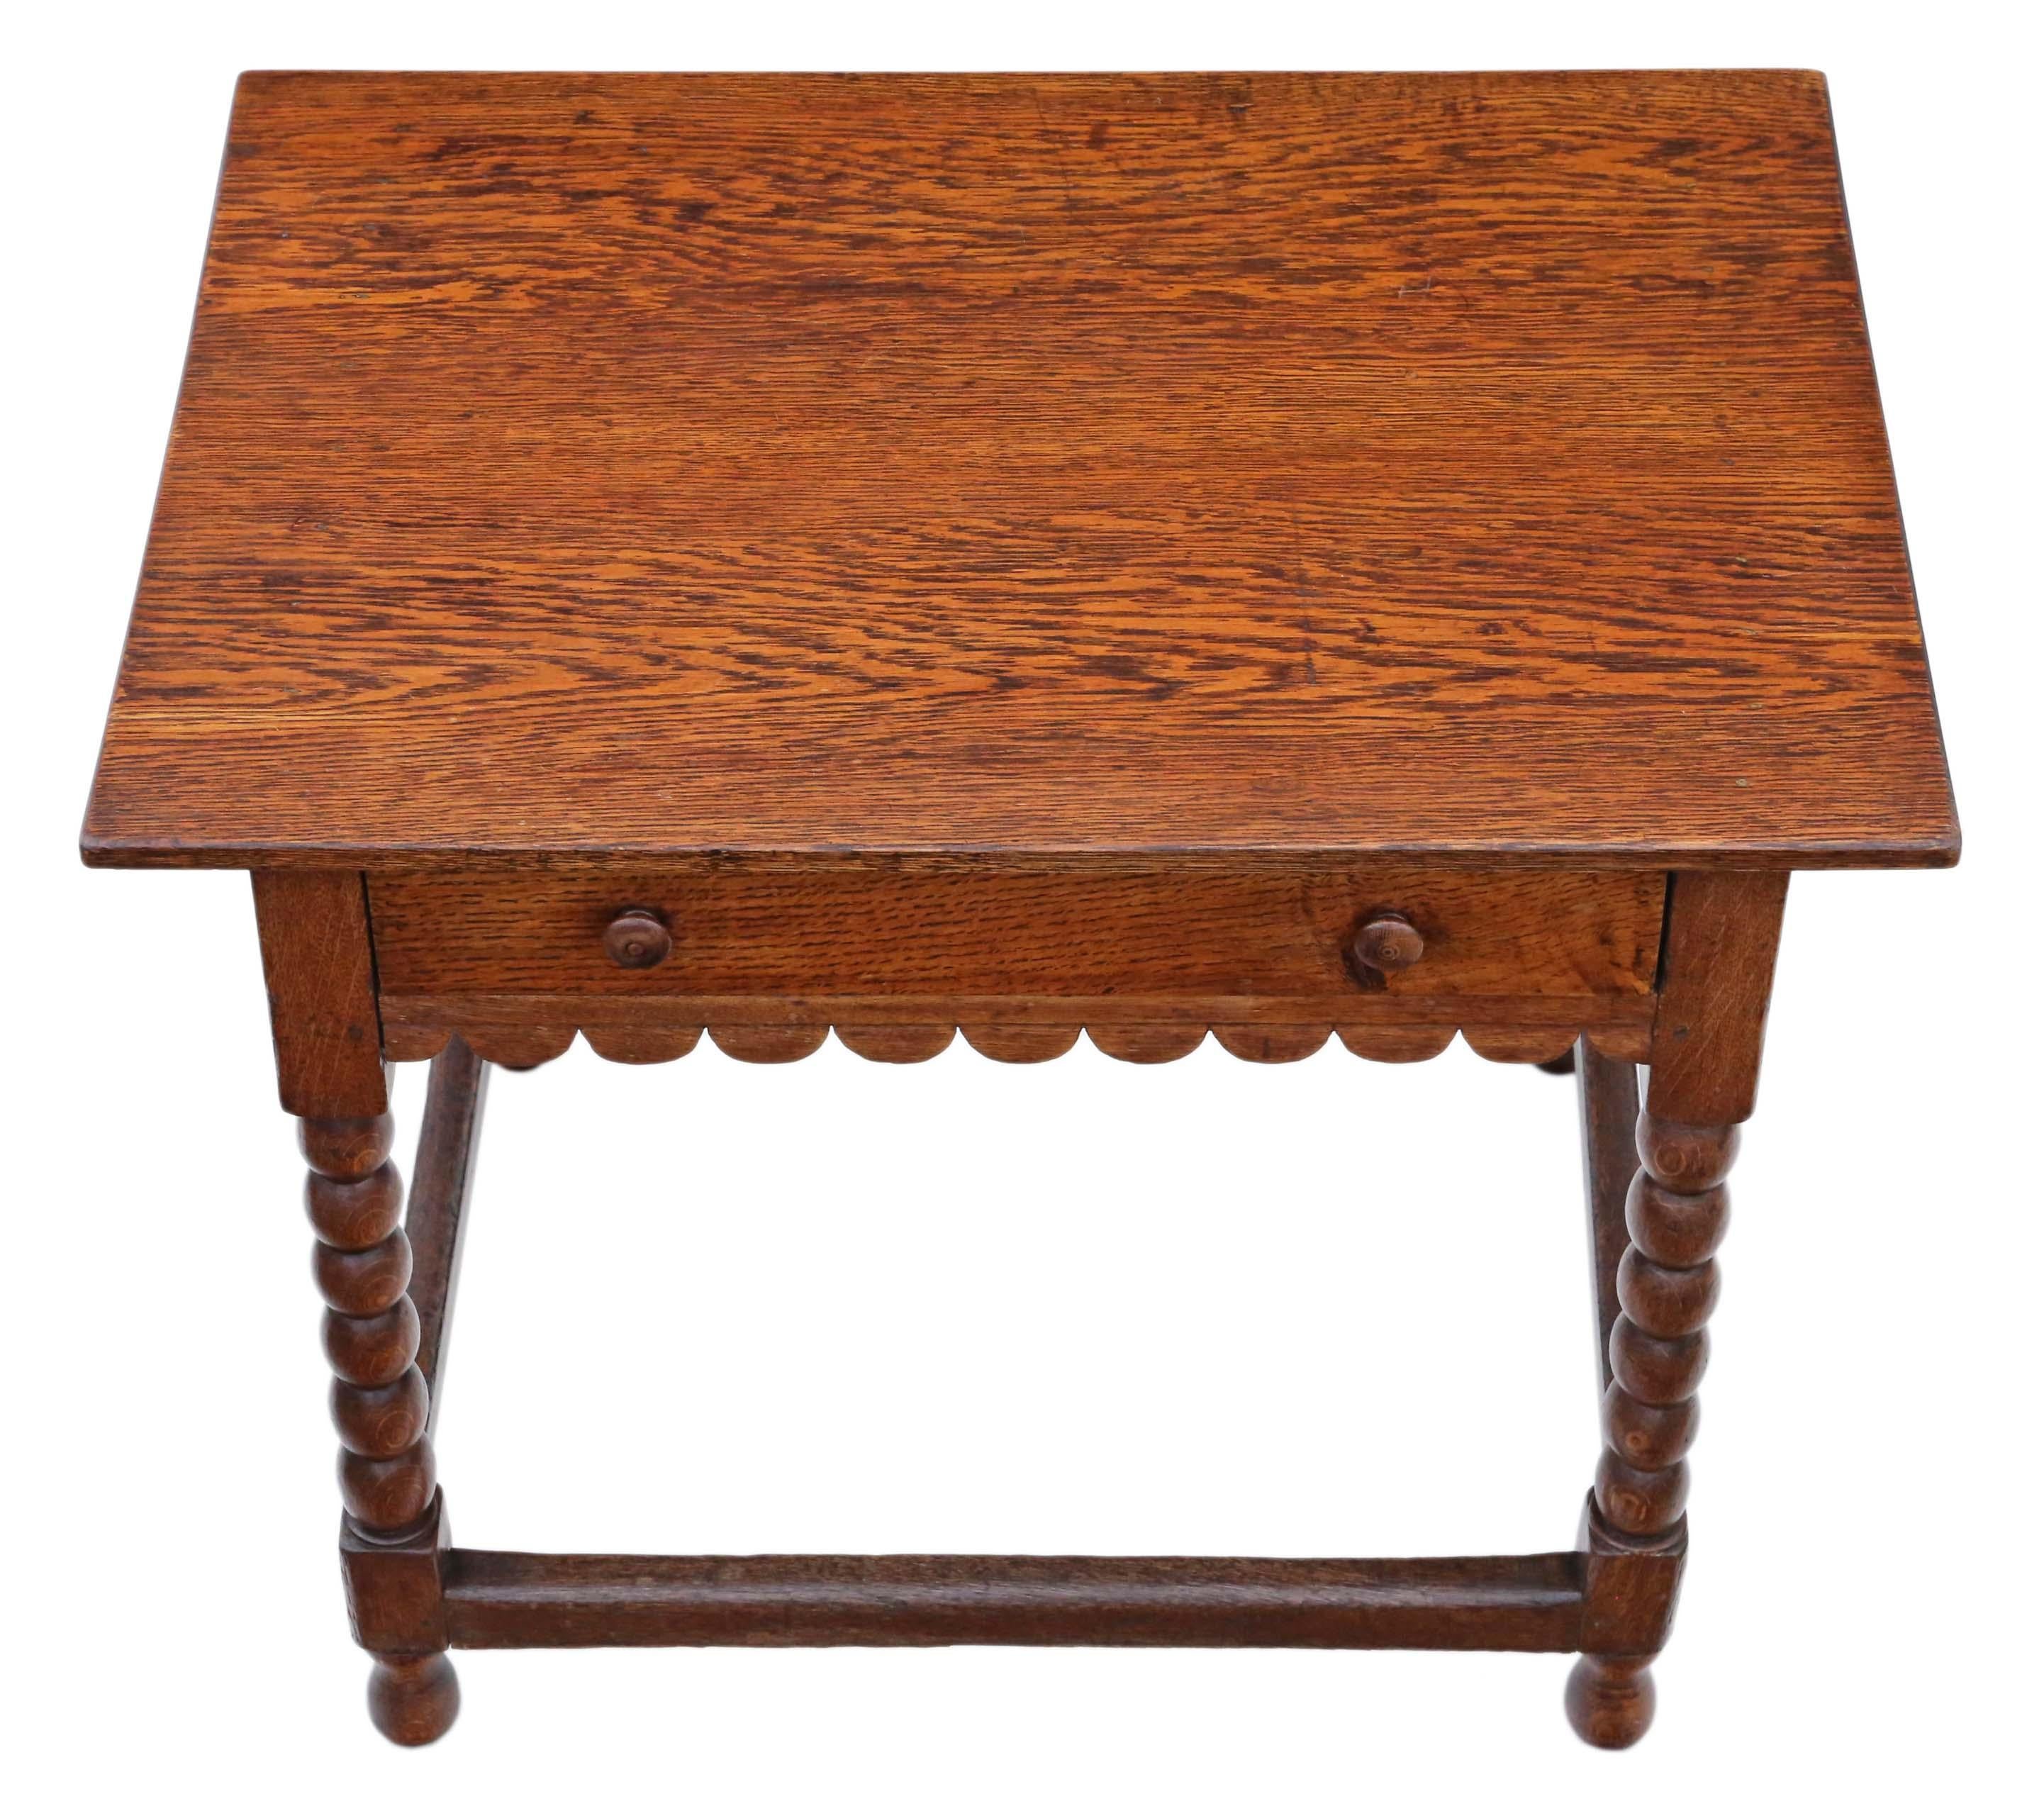 Antique quality Georgian C1800 and later oak writing side occasional table with drawer. 

Solid with no loose joints. A charming table. The drawer slides freely.

Would look great in the right location!

Overall maximum dimensions: 87cm W x